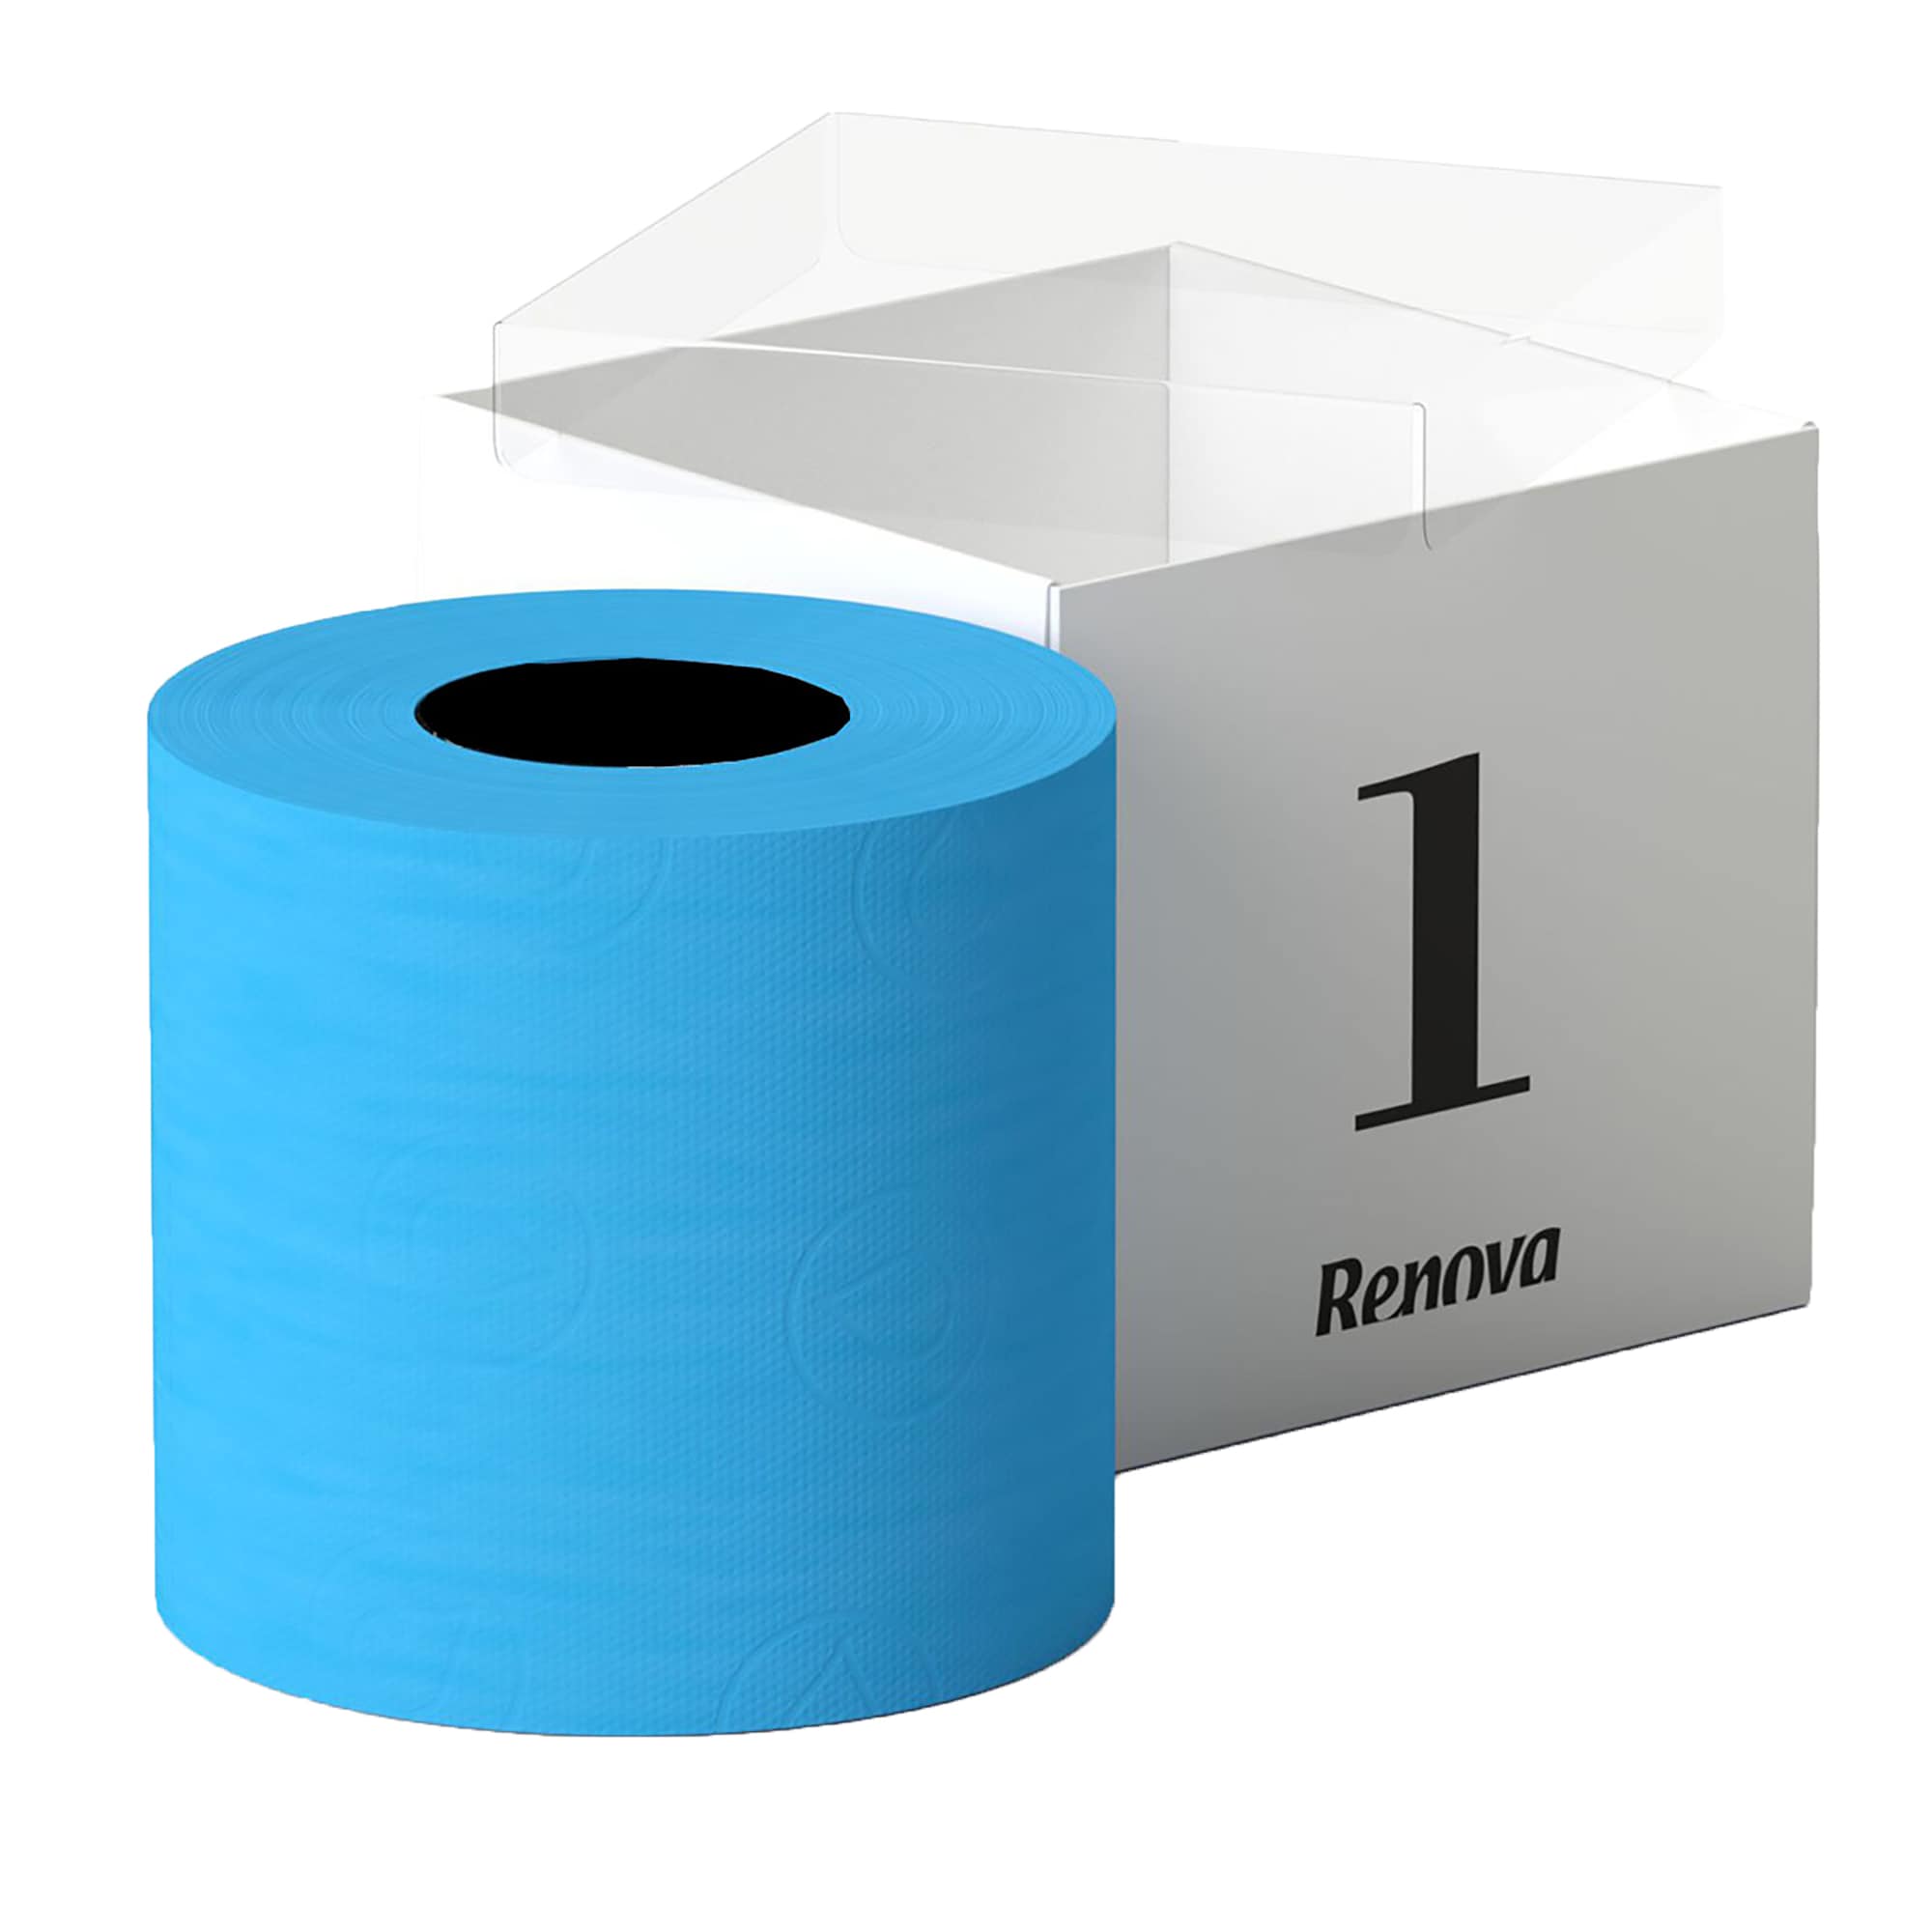 Details about   Renova Luxury Scented Colored Toilet Paper Gift Box 1 Roll 3-Ply Bath Tissue 